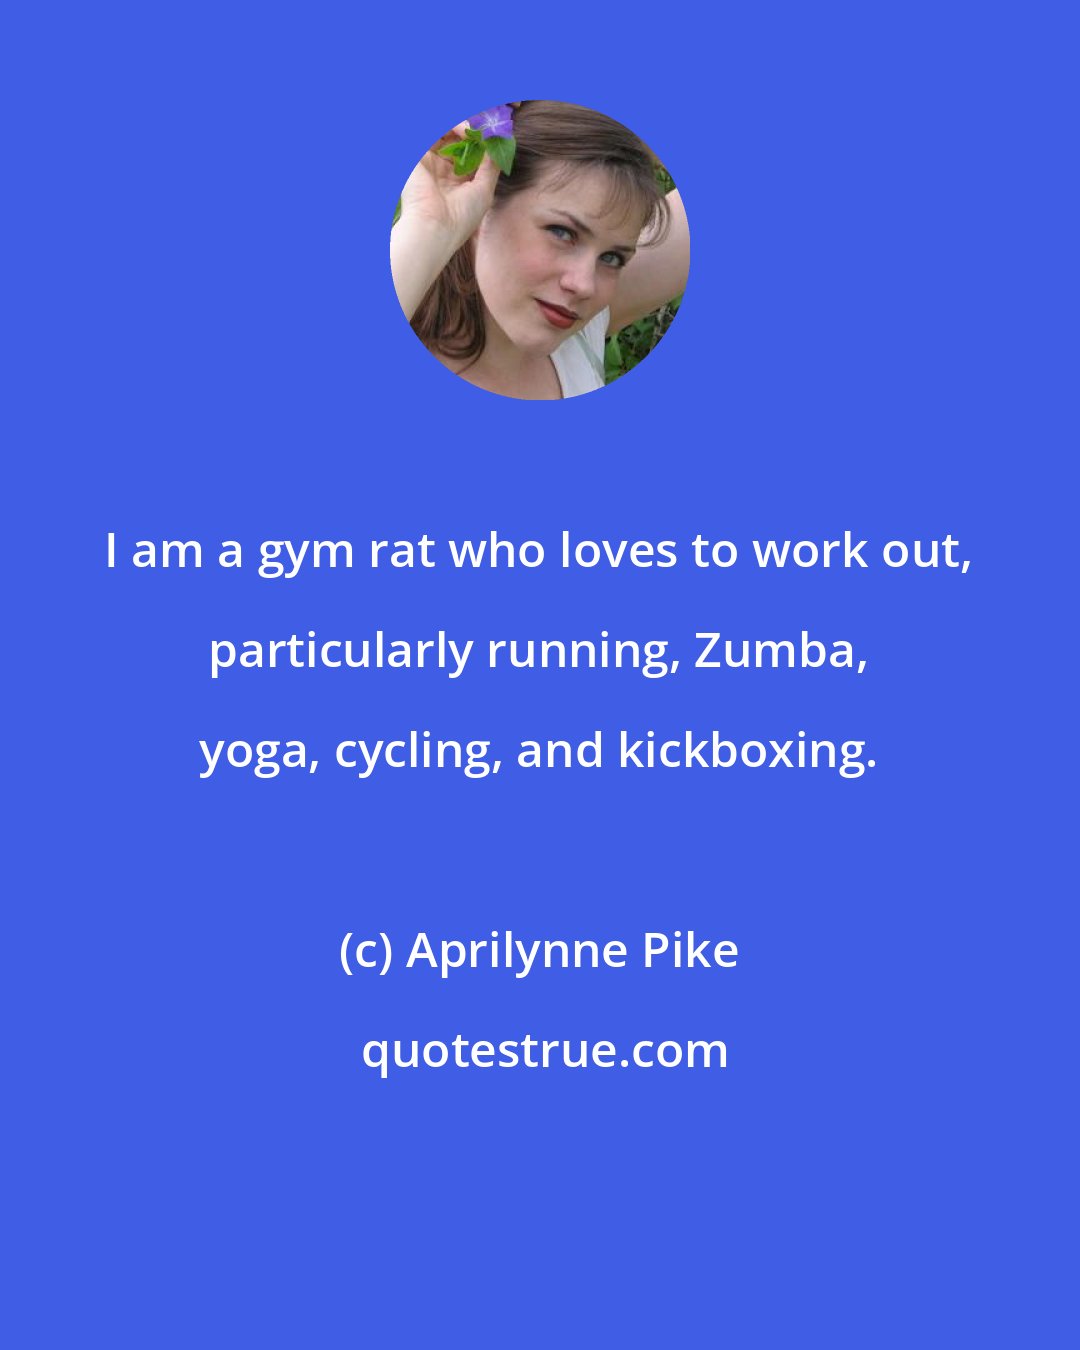 Aprilynne Pike: I am a gym rat who loves to work out, particularly running, Zumba, yoga, cycling, and kickboxing.